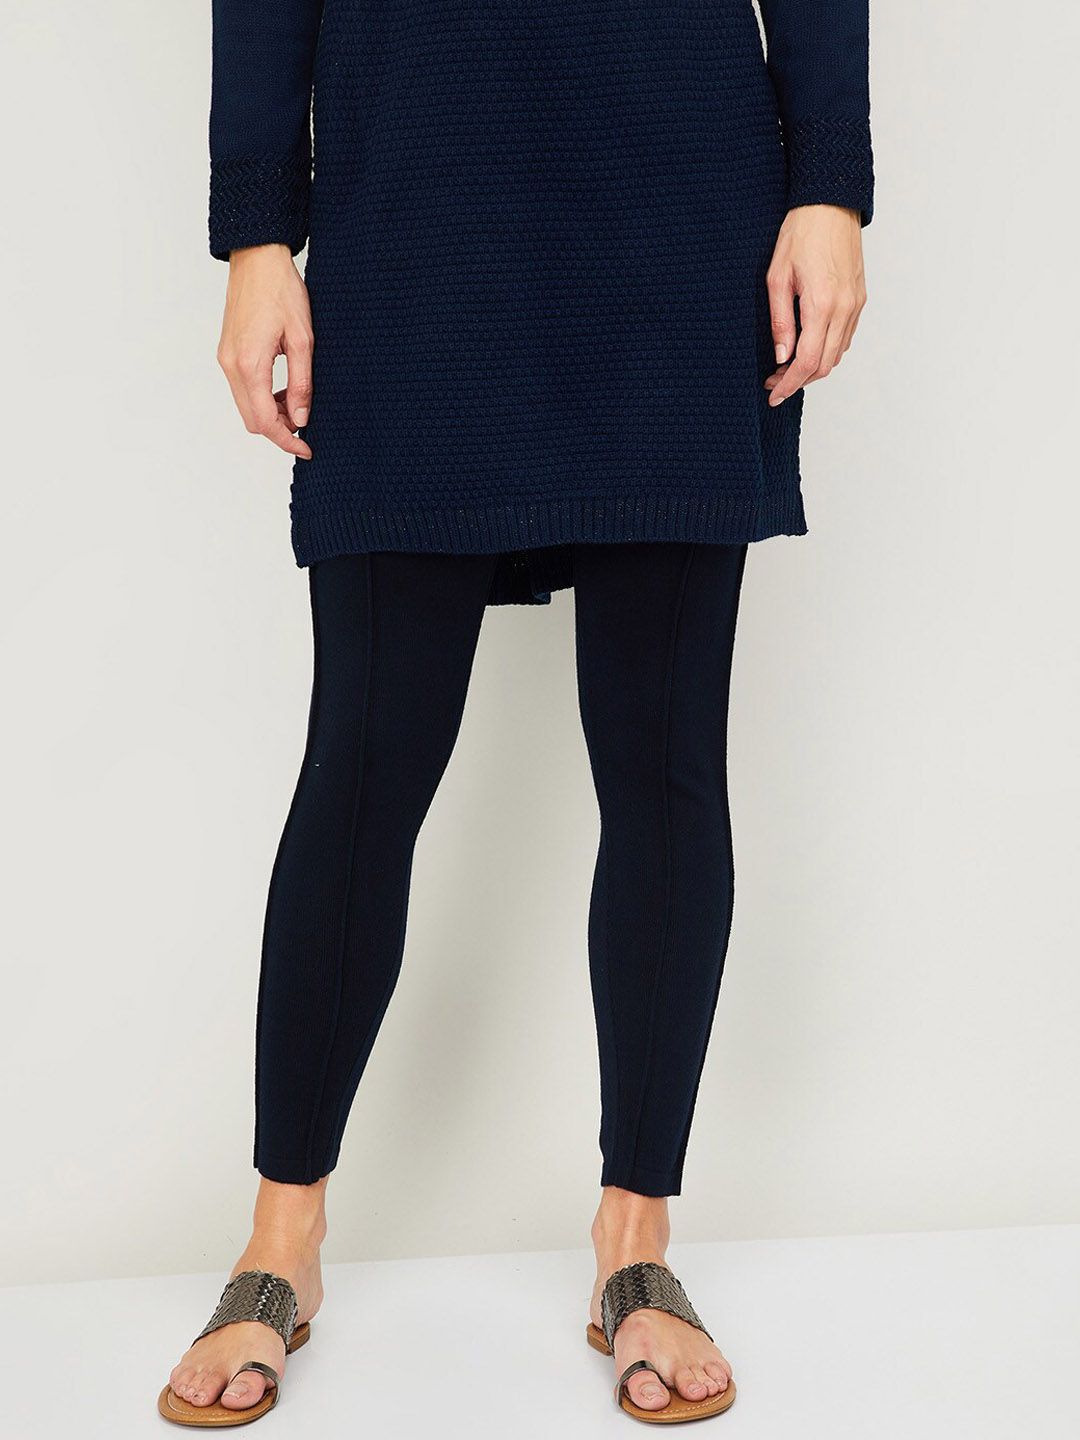 Melange by Lifestyle Women Navy-Blue Solid Ankle-Length Leggings Price in India